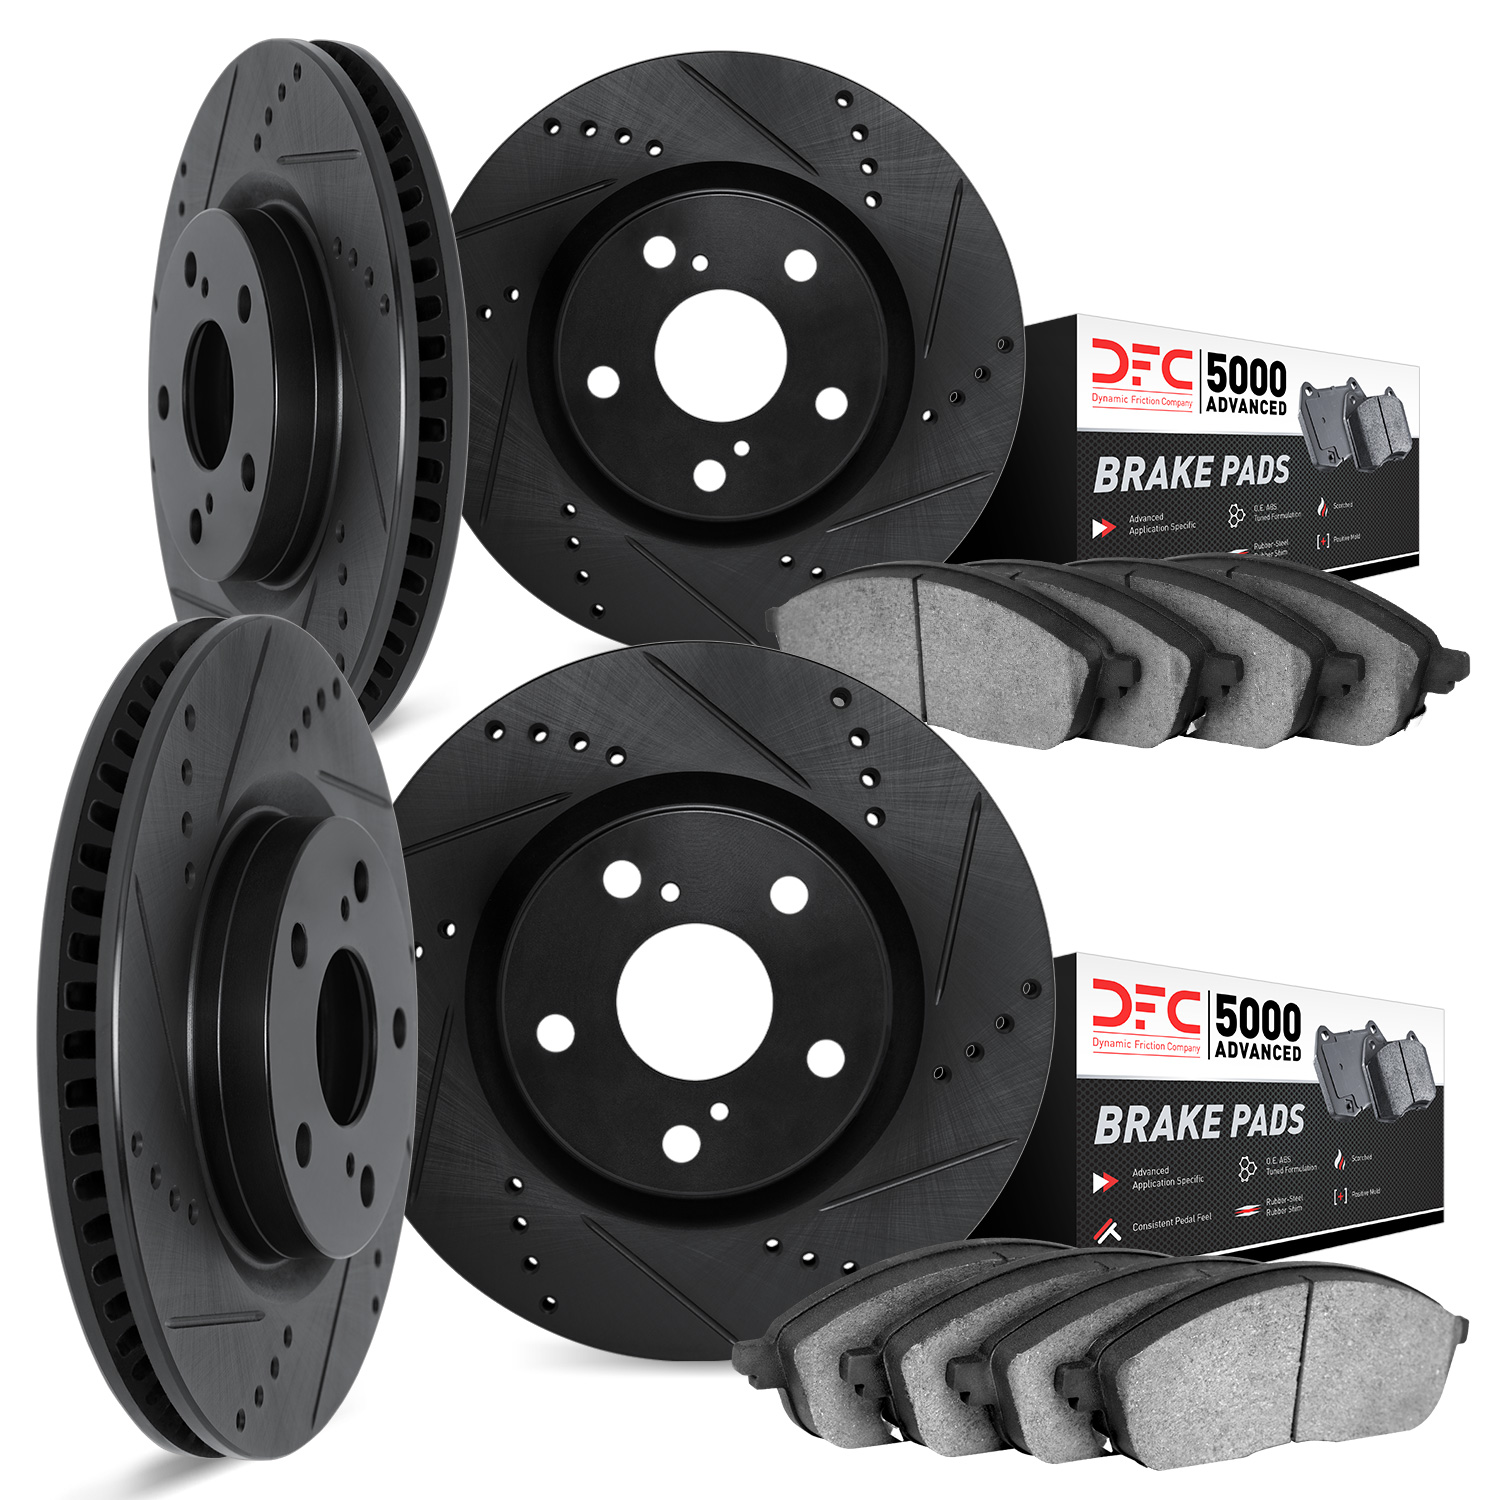 8504-46015 Drilled/Slotted Brake Rotors w/5000 Advanced Brake Pads Kit [Black], 2003-2007 GM, Position: Front and Rear